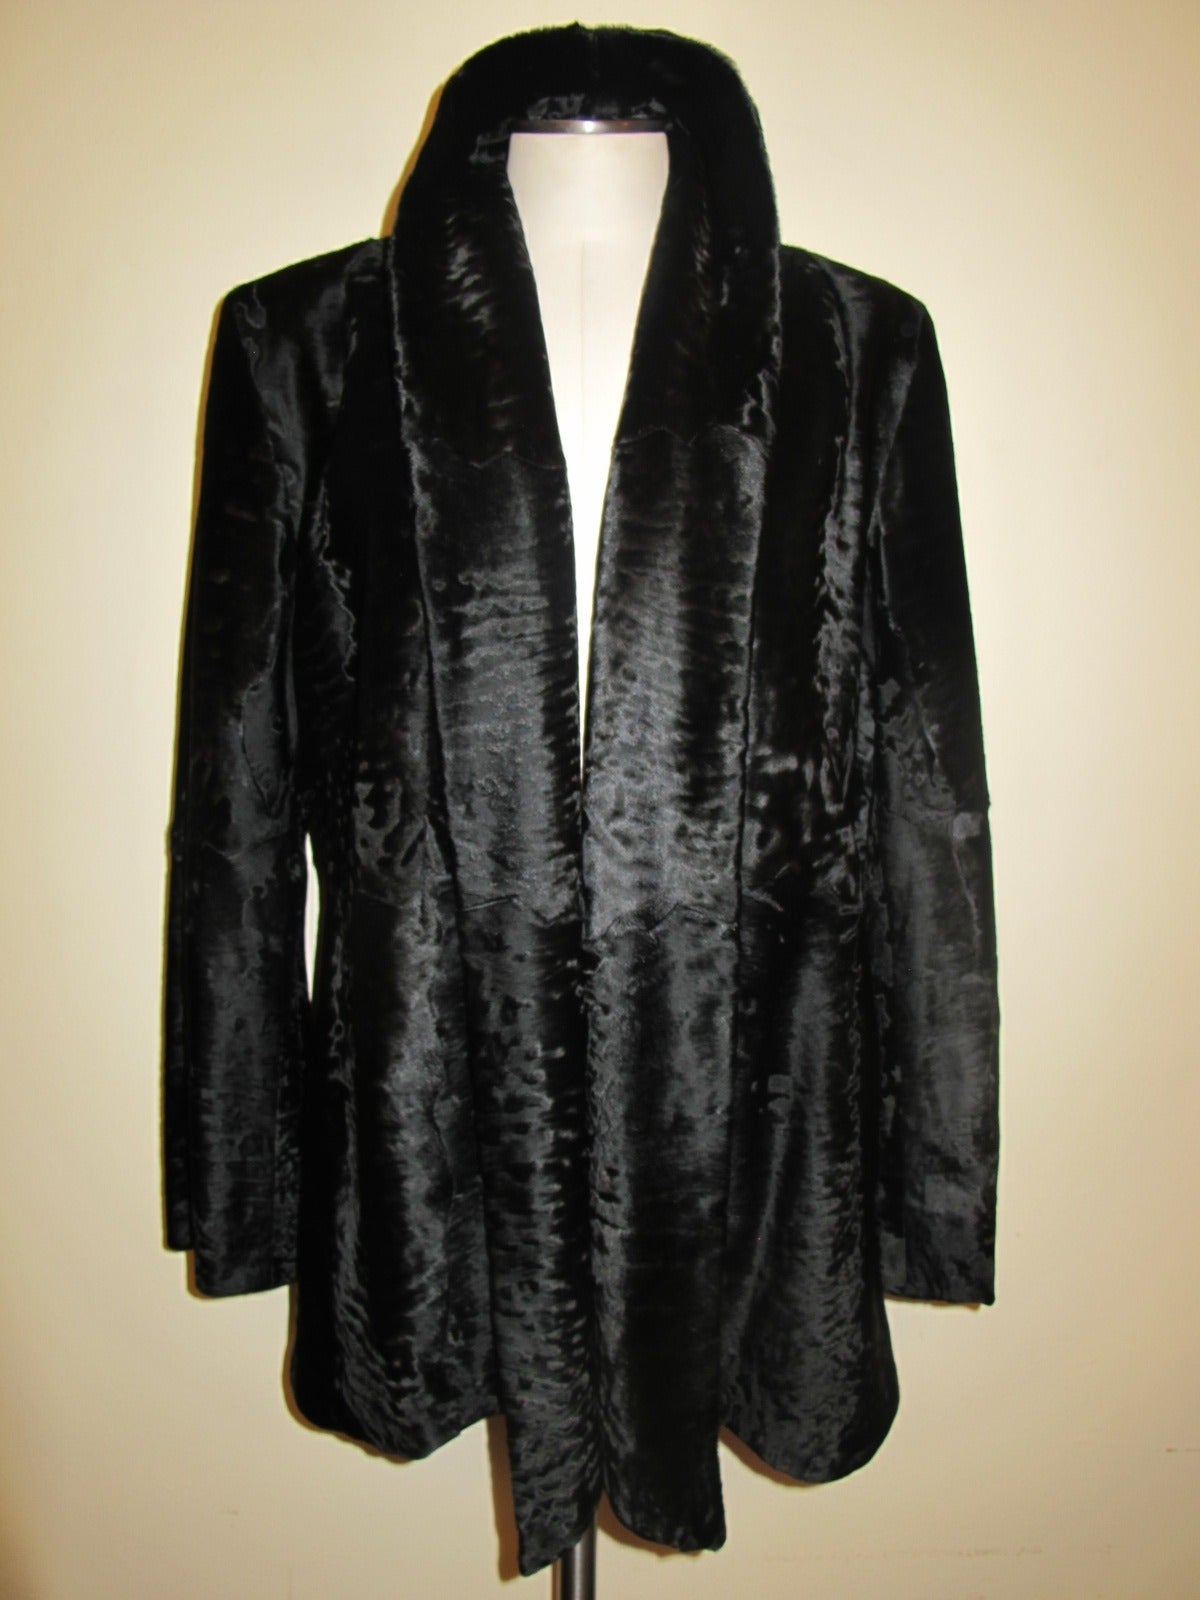 This elegant Giuliana Teso Black broadtail piece is an open jacket. Collar may be worn tuxedo style or standing up. The three inch continuous collar gives a smoking jacket effect. The collar ends in a pointed, angular design. Sleeve length measures